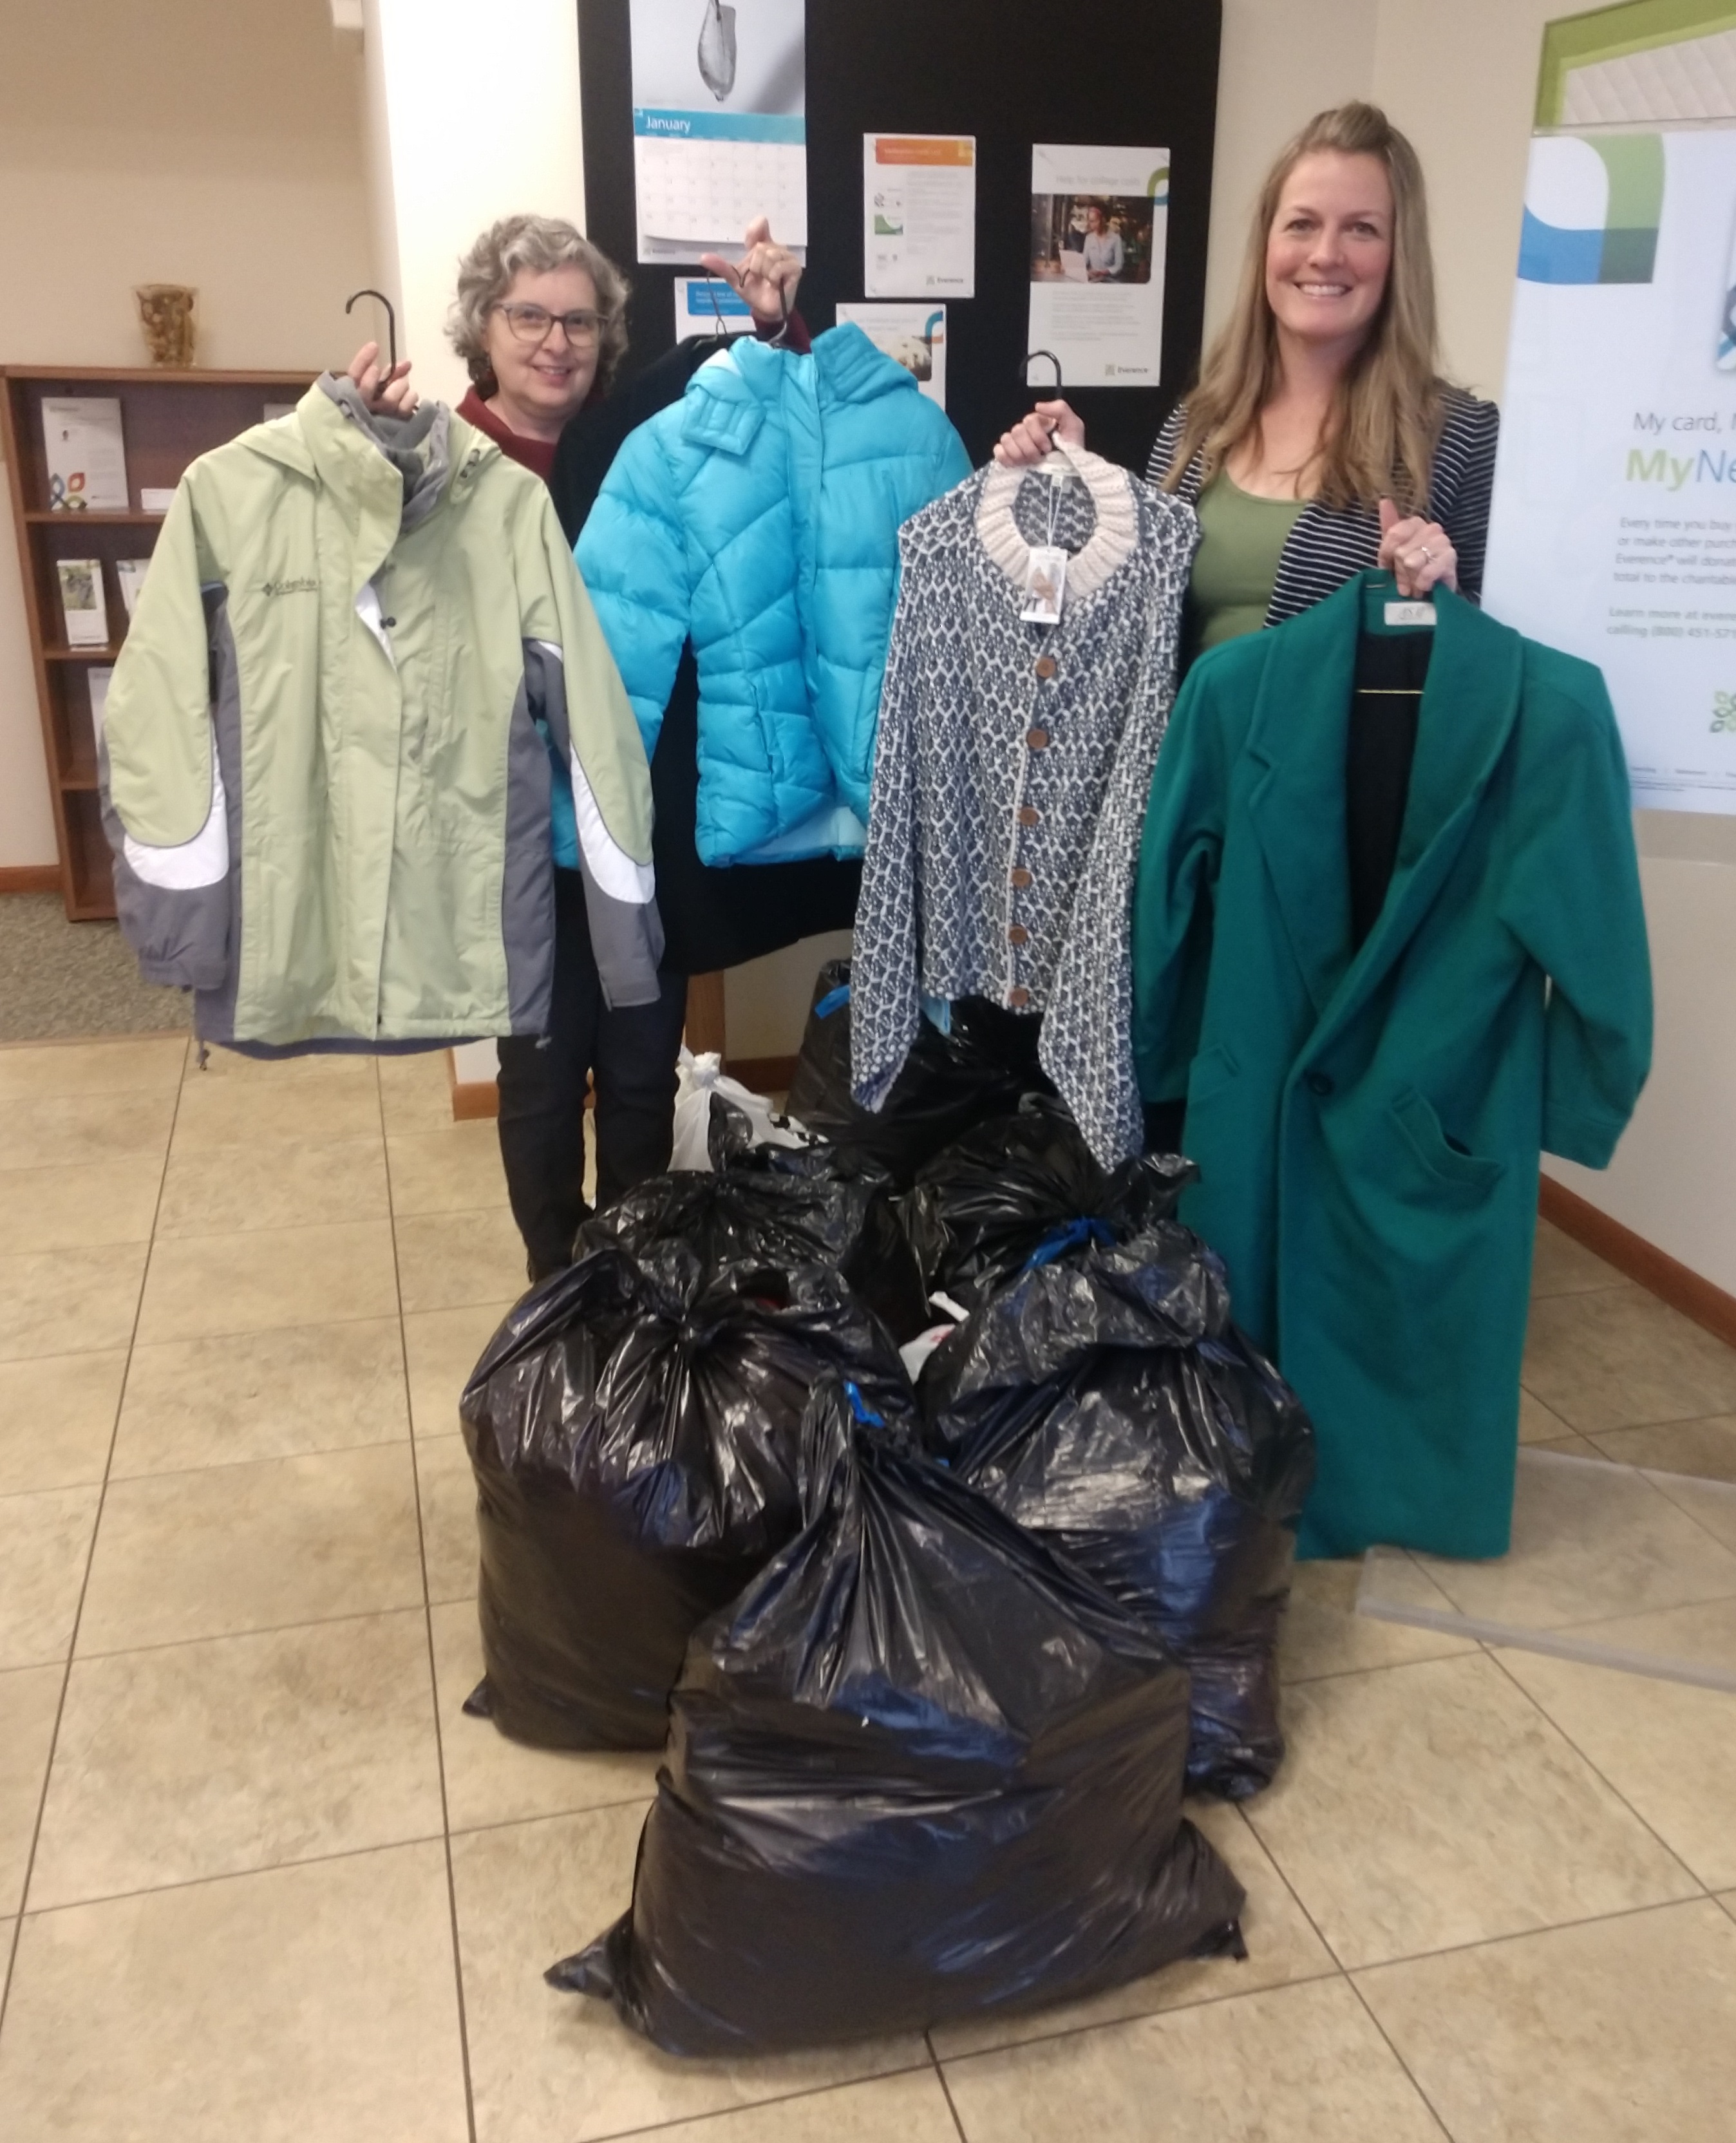 2019 winter clothing drive